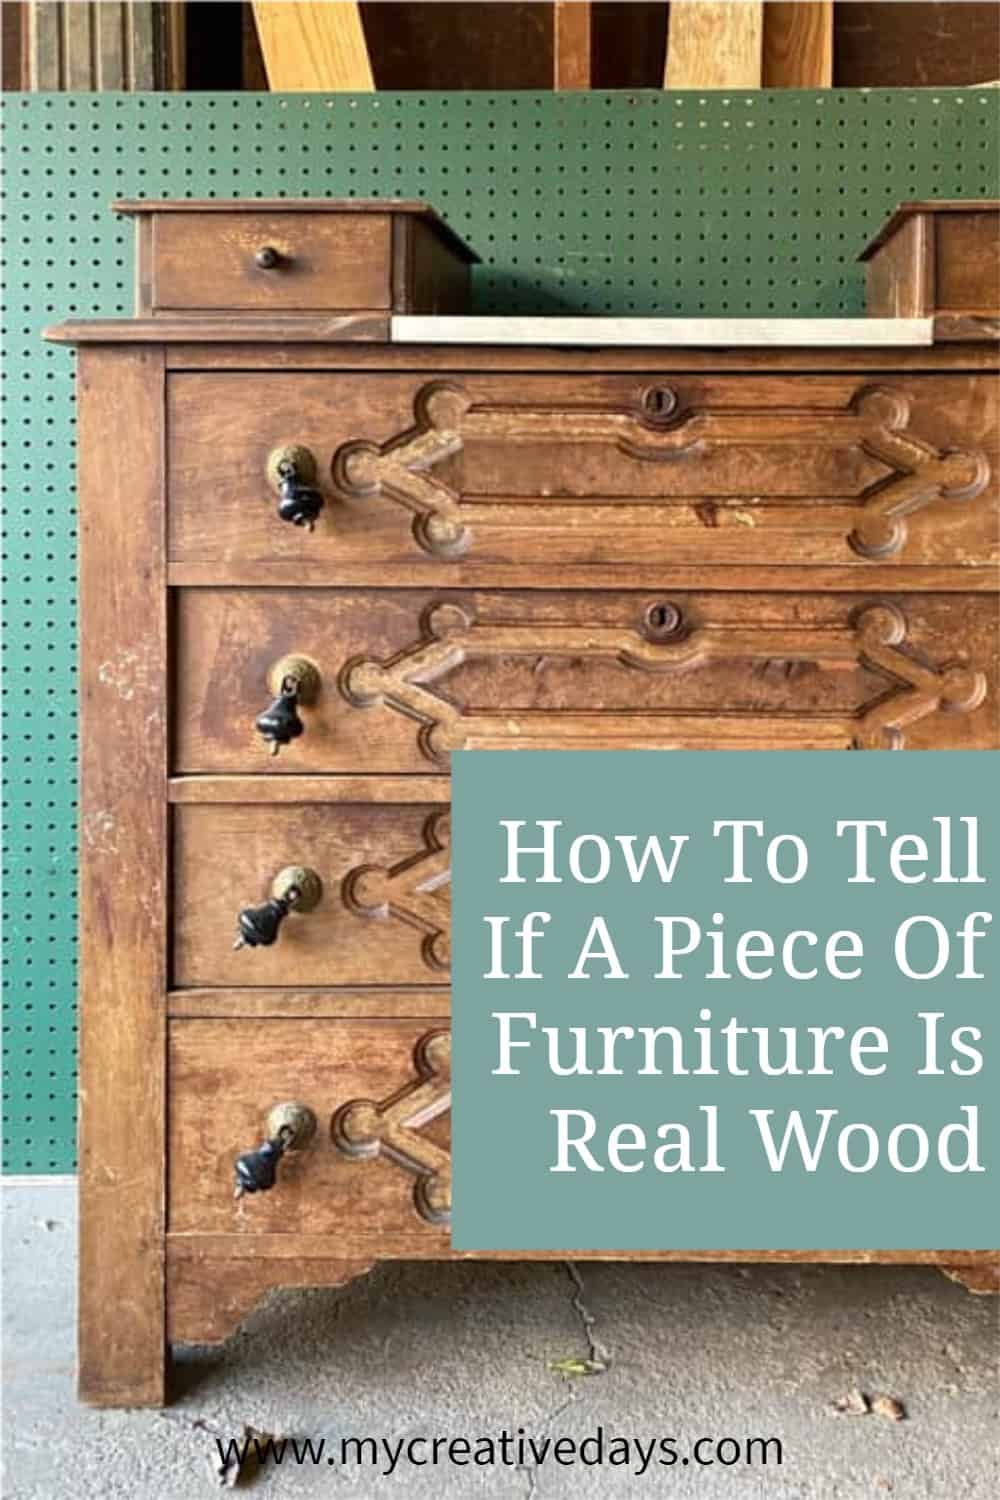 How To Tell If A Piece Of Furniture Is Real Wood - My Creative Days